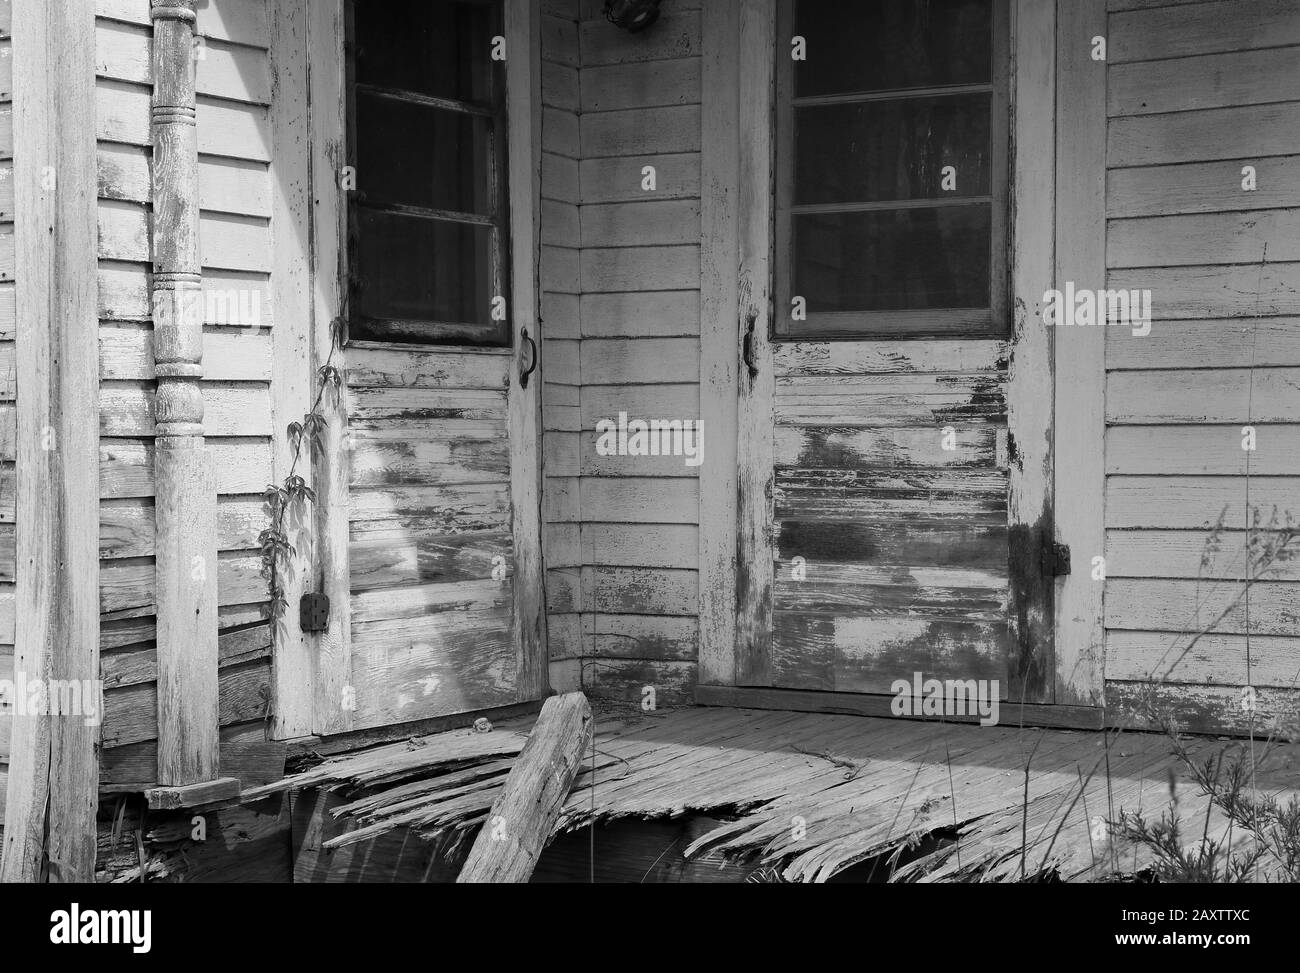 Grayscale shot of an abandoned farmhouse porch in dilapidated condition Stock Photo